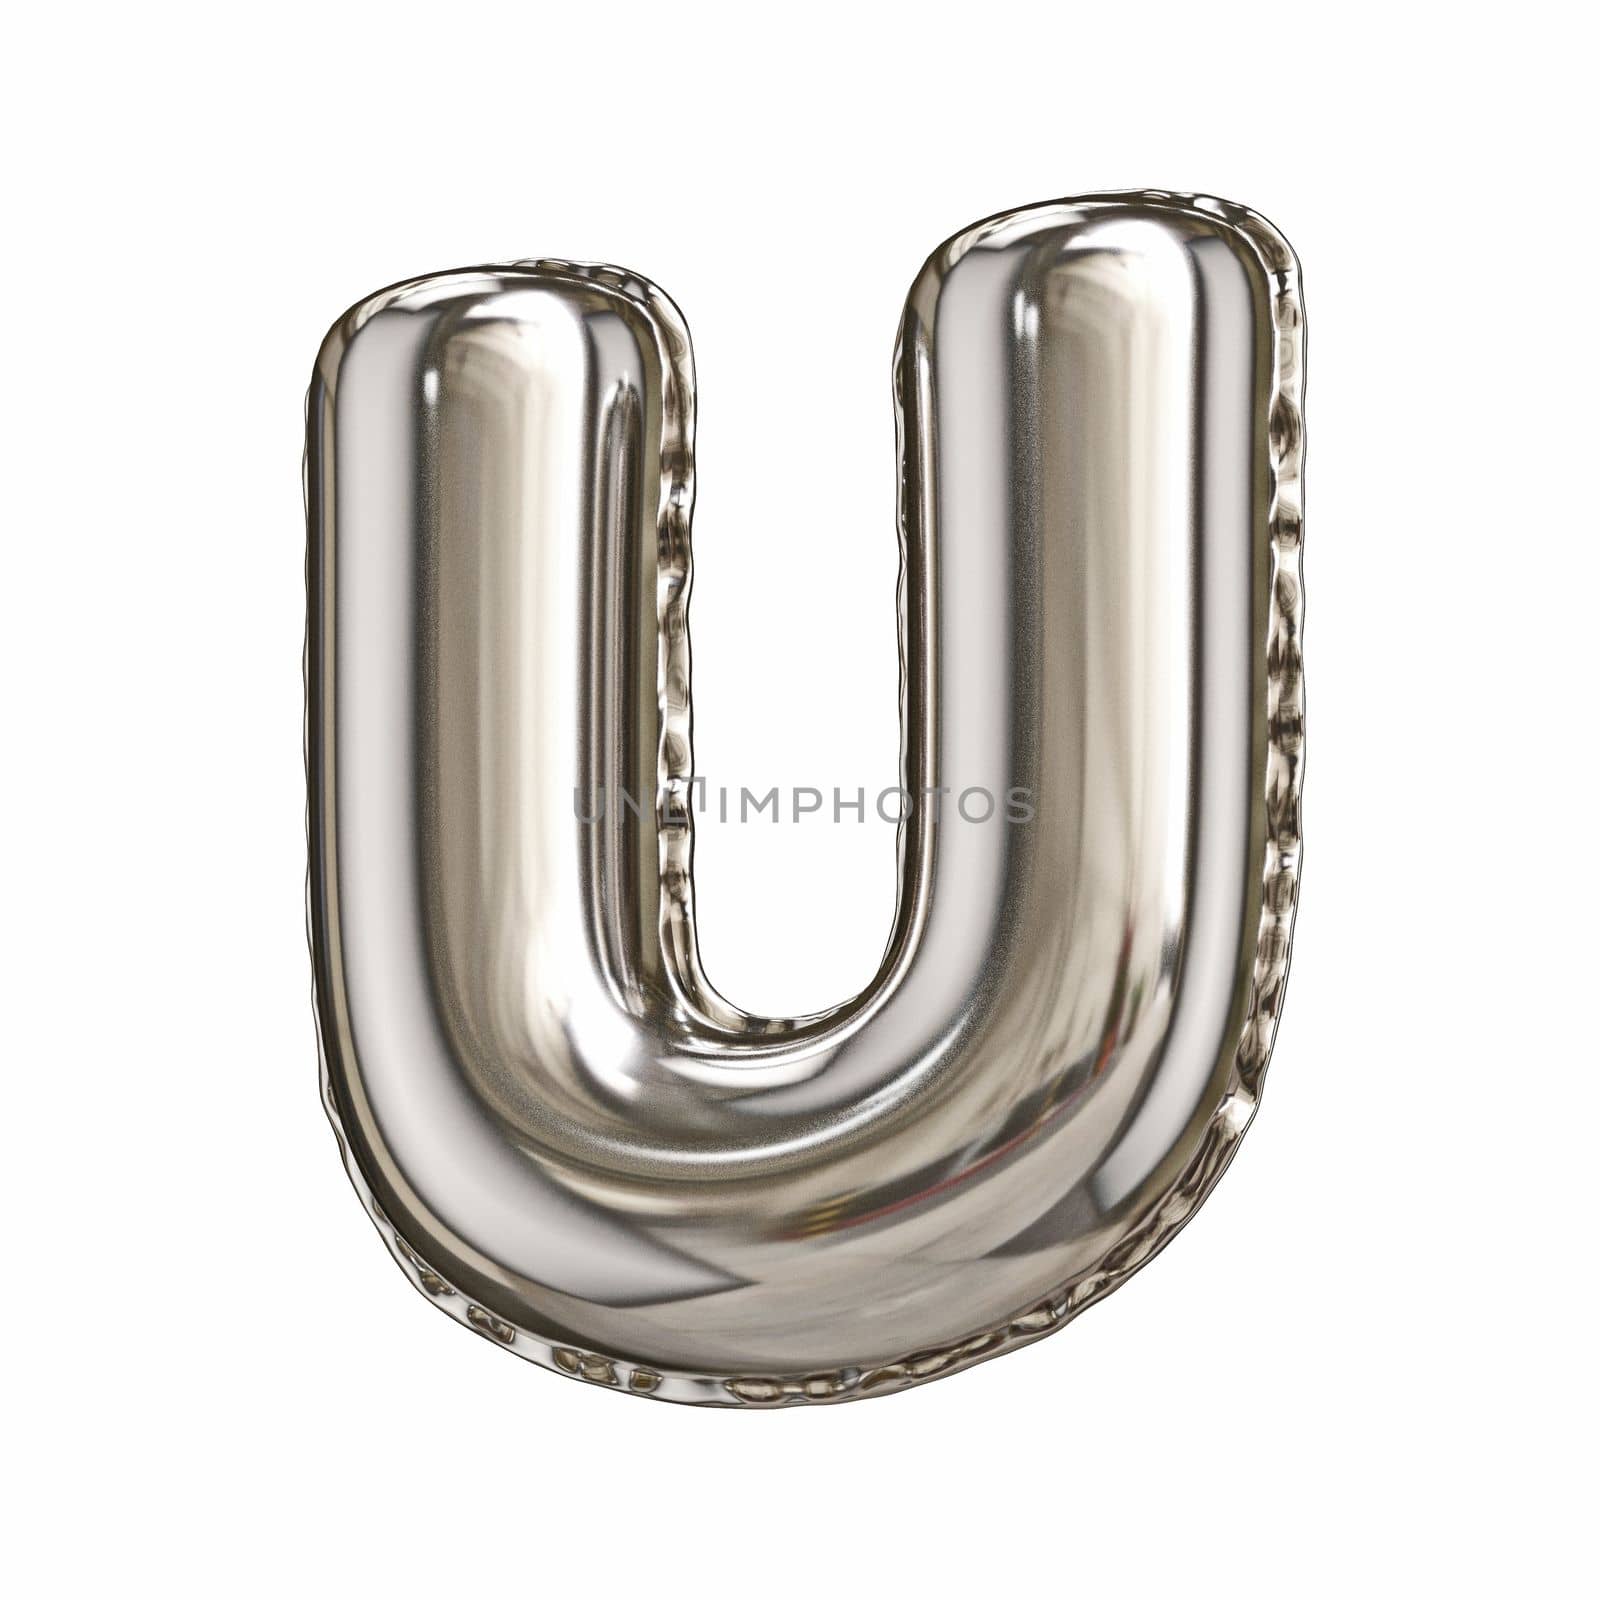 Silver foil balloon font letter U 3D rendering illustration isolated on white background